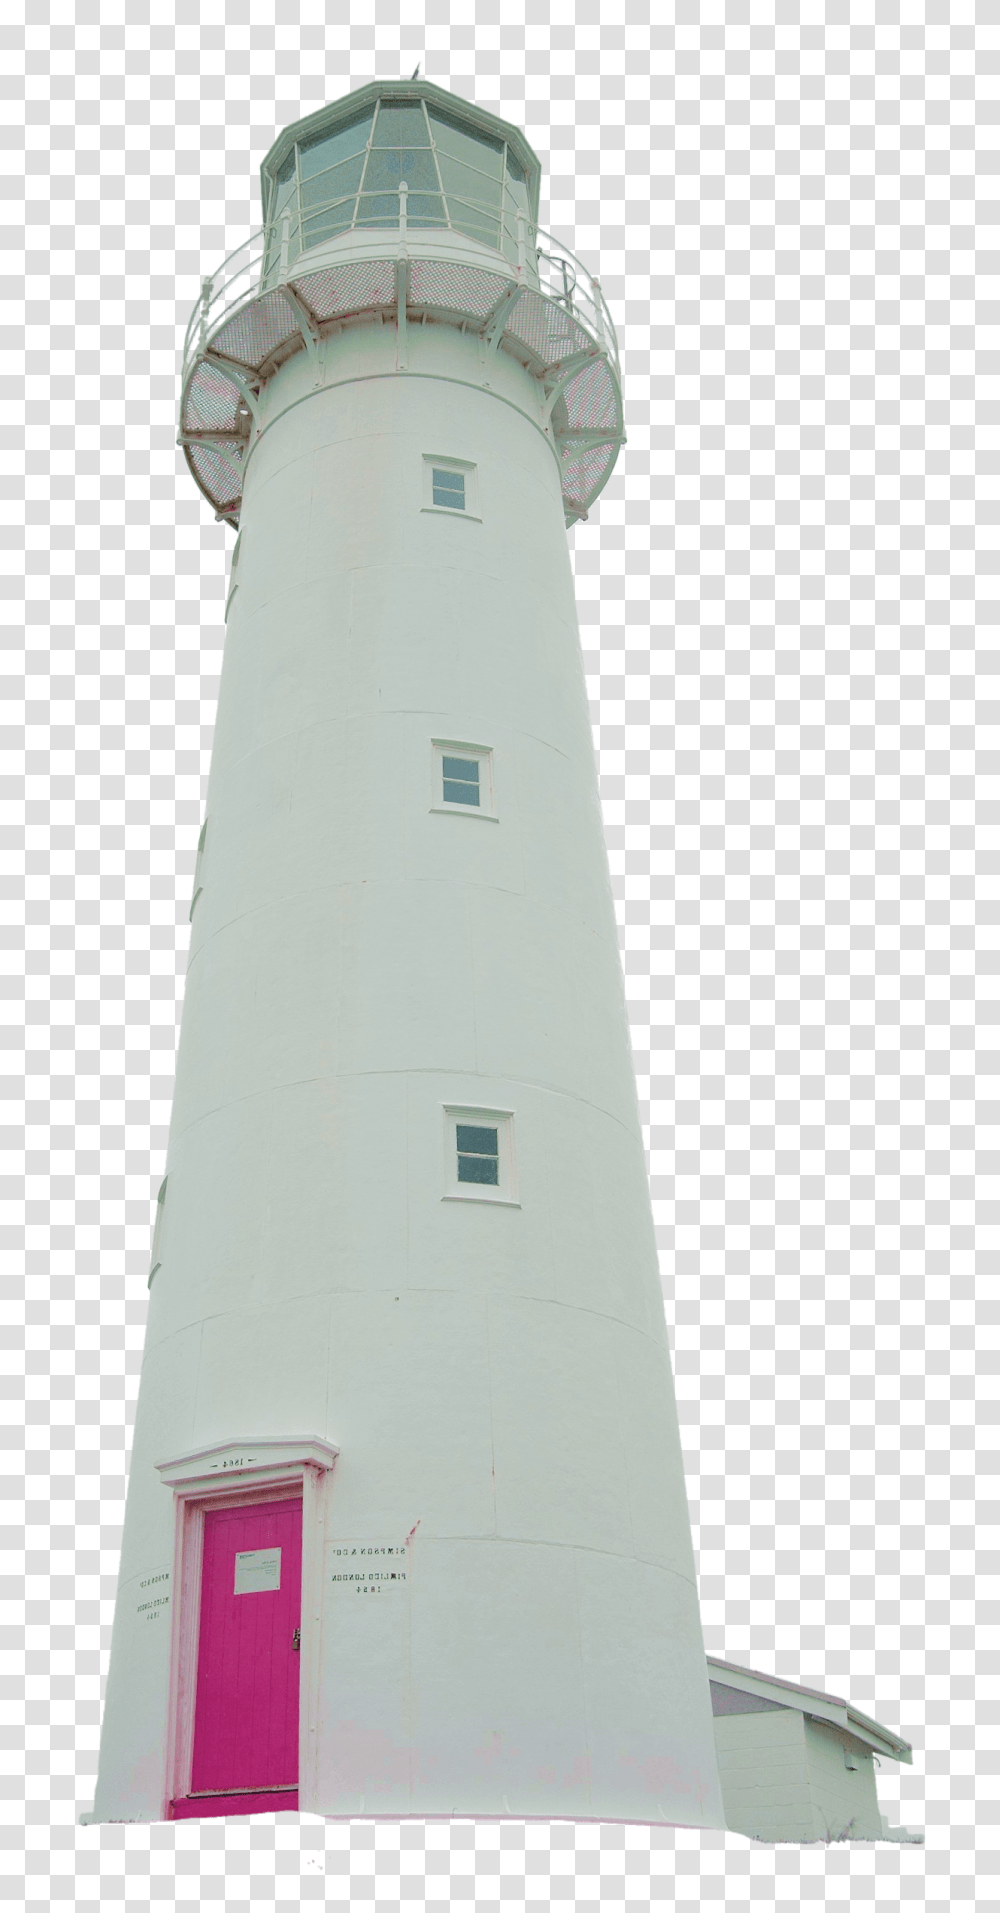 Lighthouse Image, Architecture, Building, Tower, Beacon Transparent Png